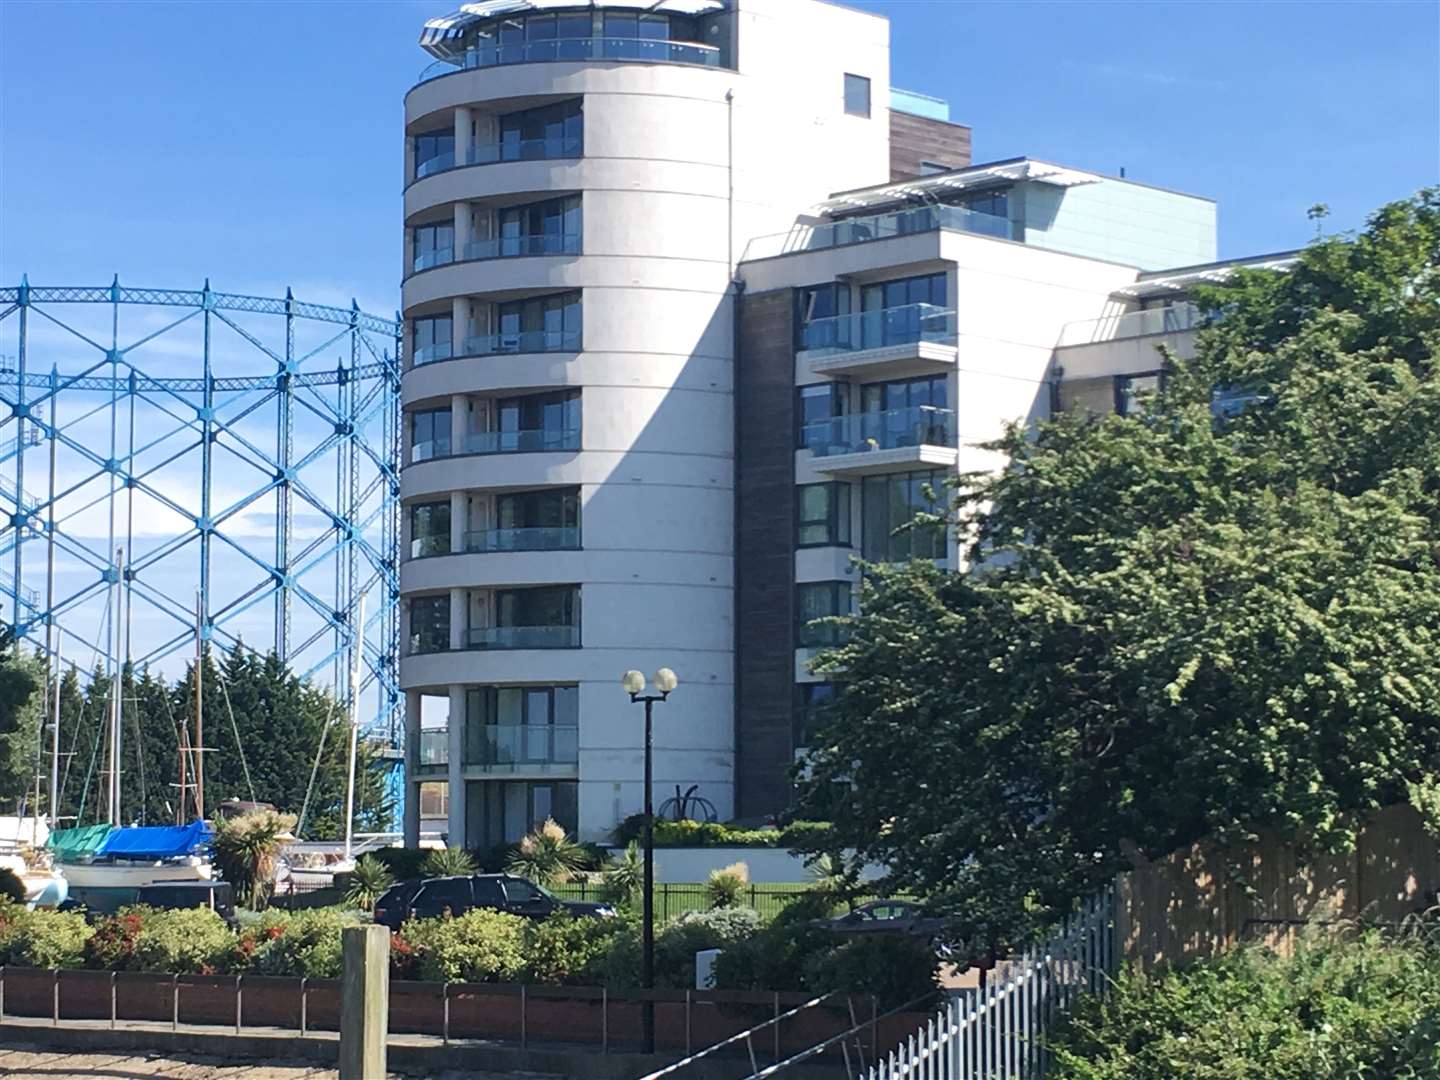 Grenfell Tower-style cladding was supposed to be removed from The Hamptons in Gillingham a year ago